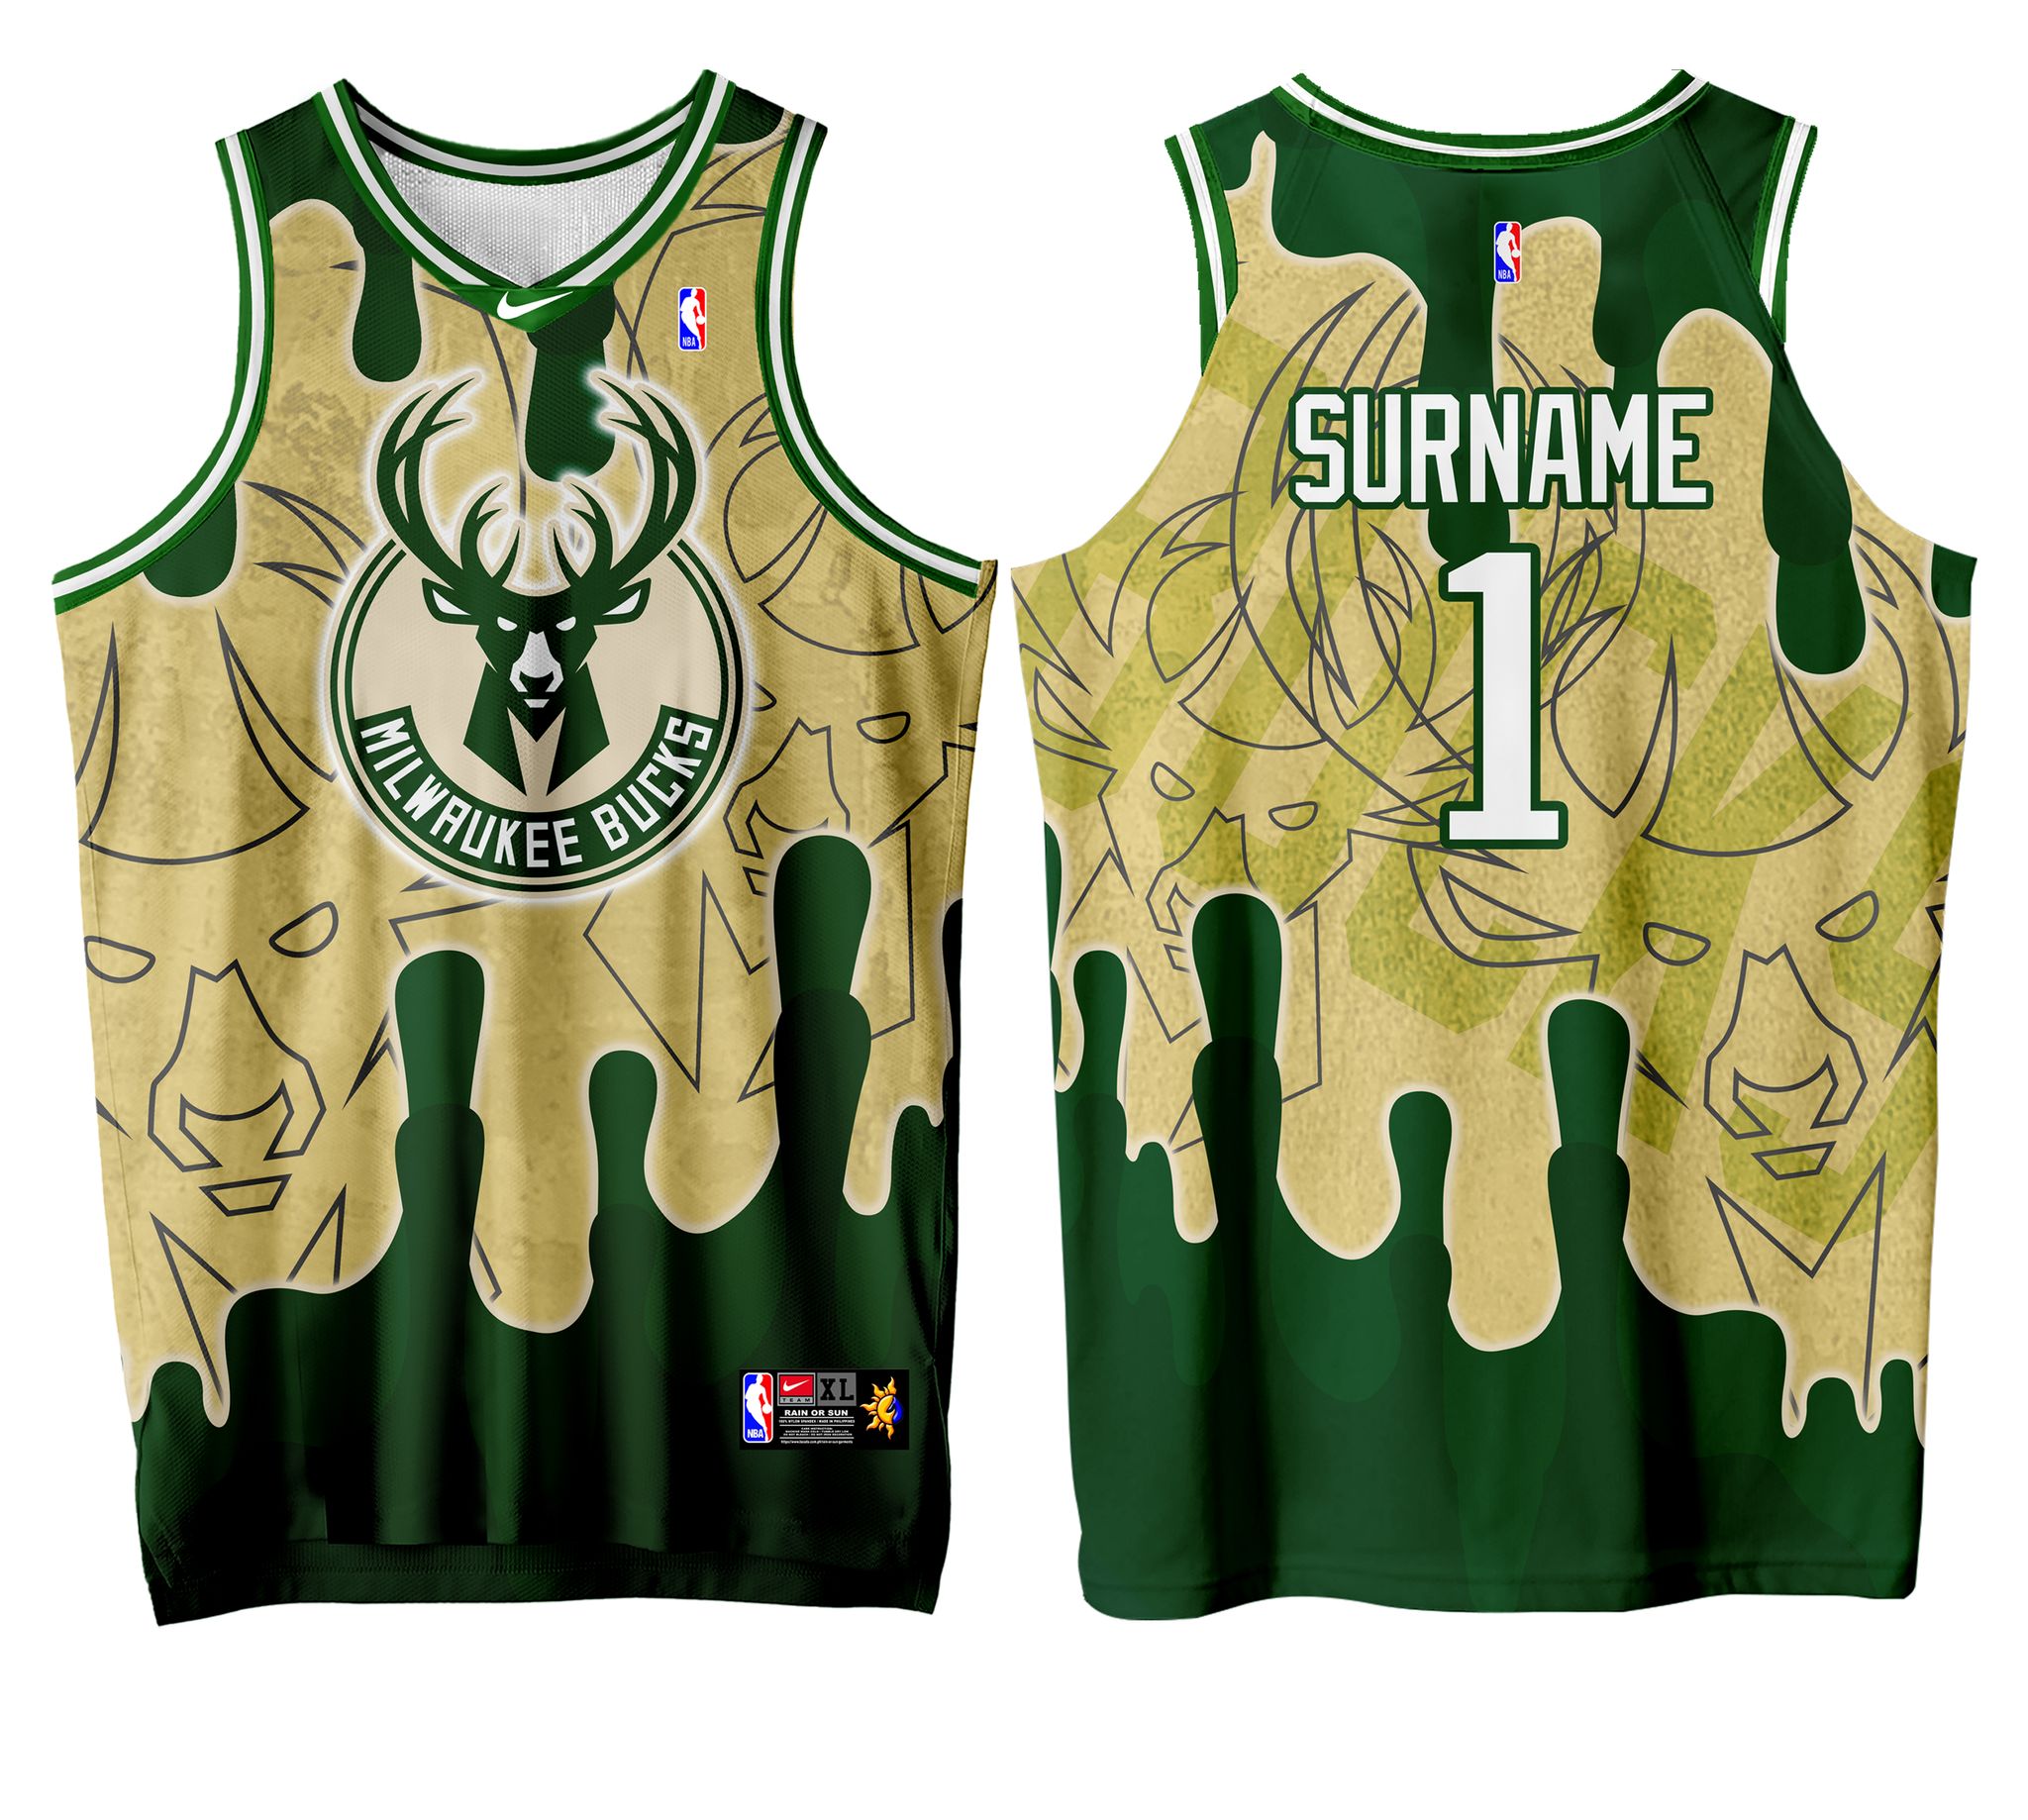 free customize of name and number only latest milwaukee 08 basketball jersey  full sublimation high quality fabrics/trending jersey